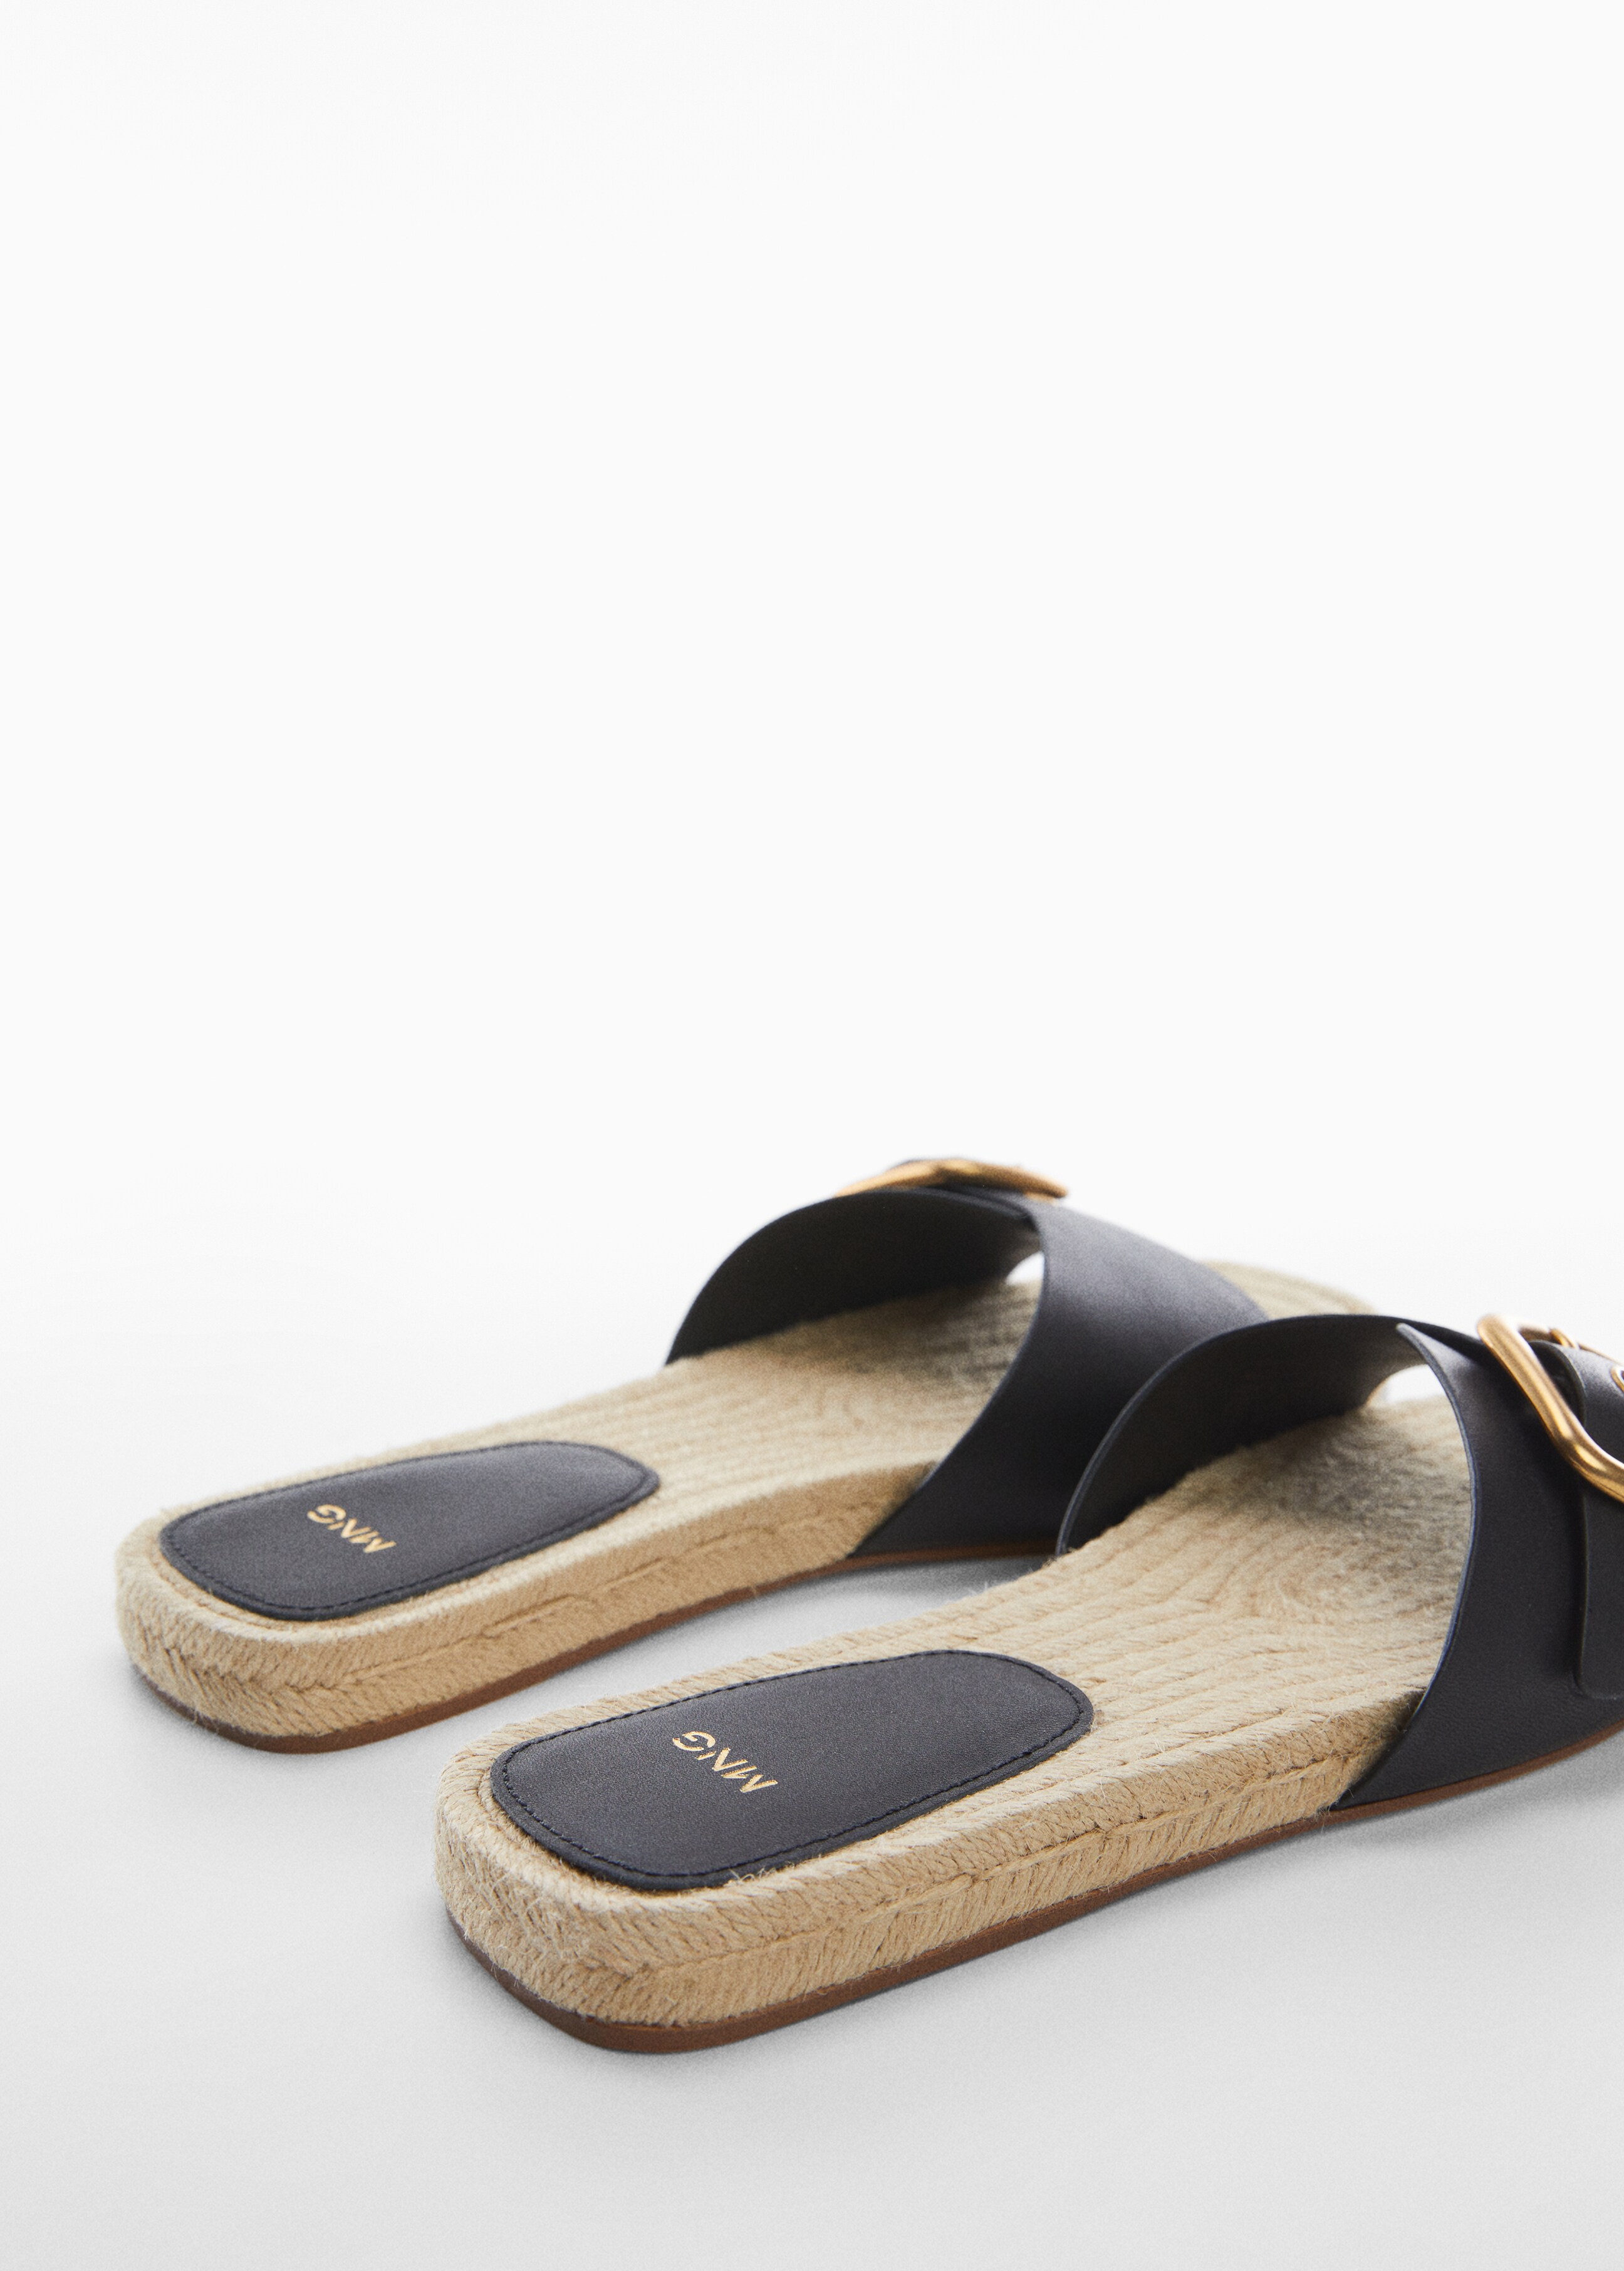 Esparto leather sandals - Details of the article 1